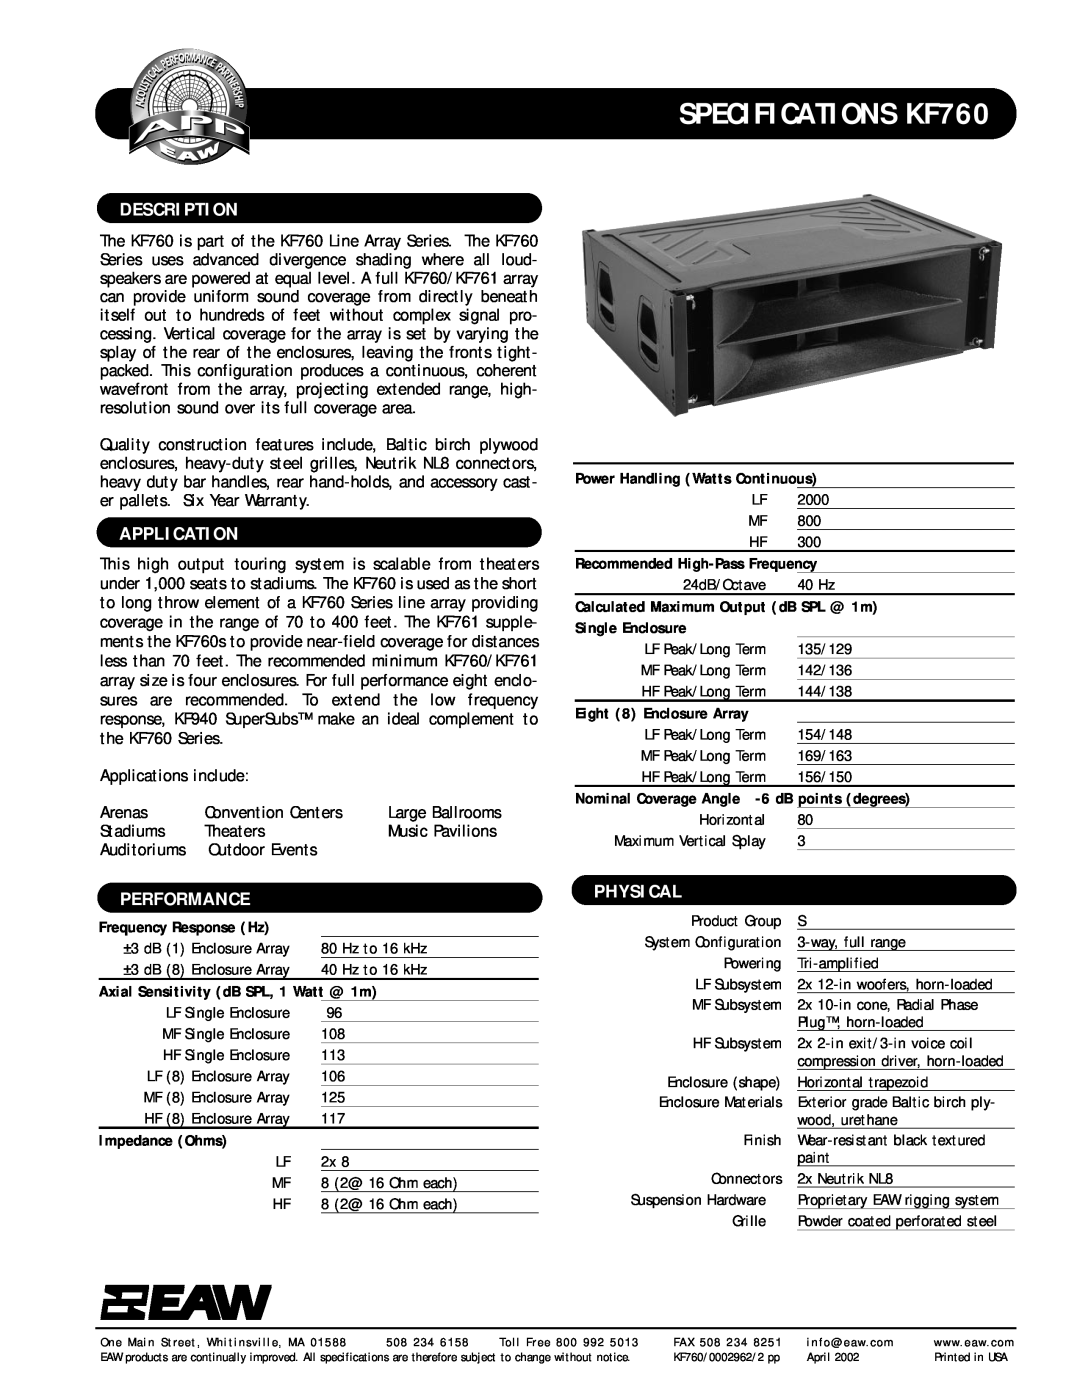 EAW specifications SPECIFICATIONS KF760, Description, Application, Performance, Physical, Single Enclosure 